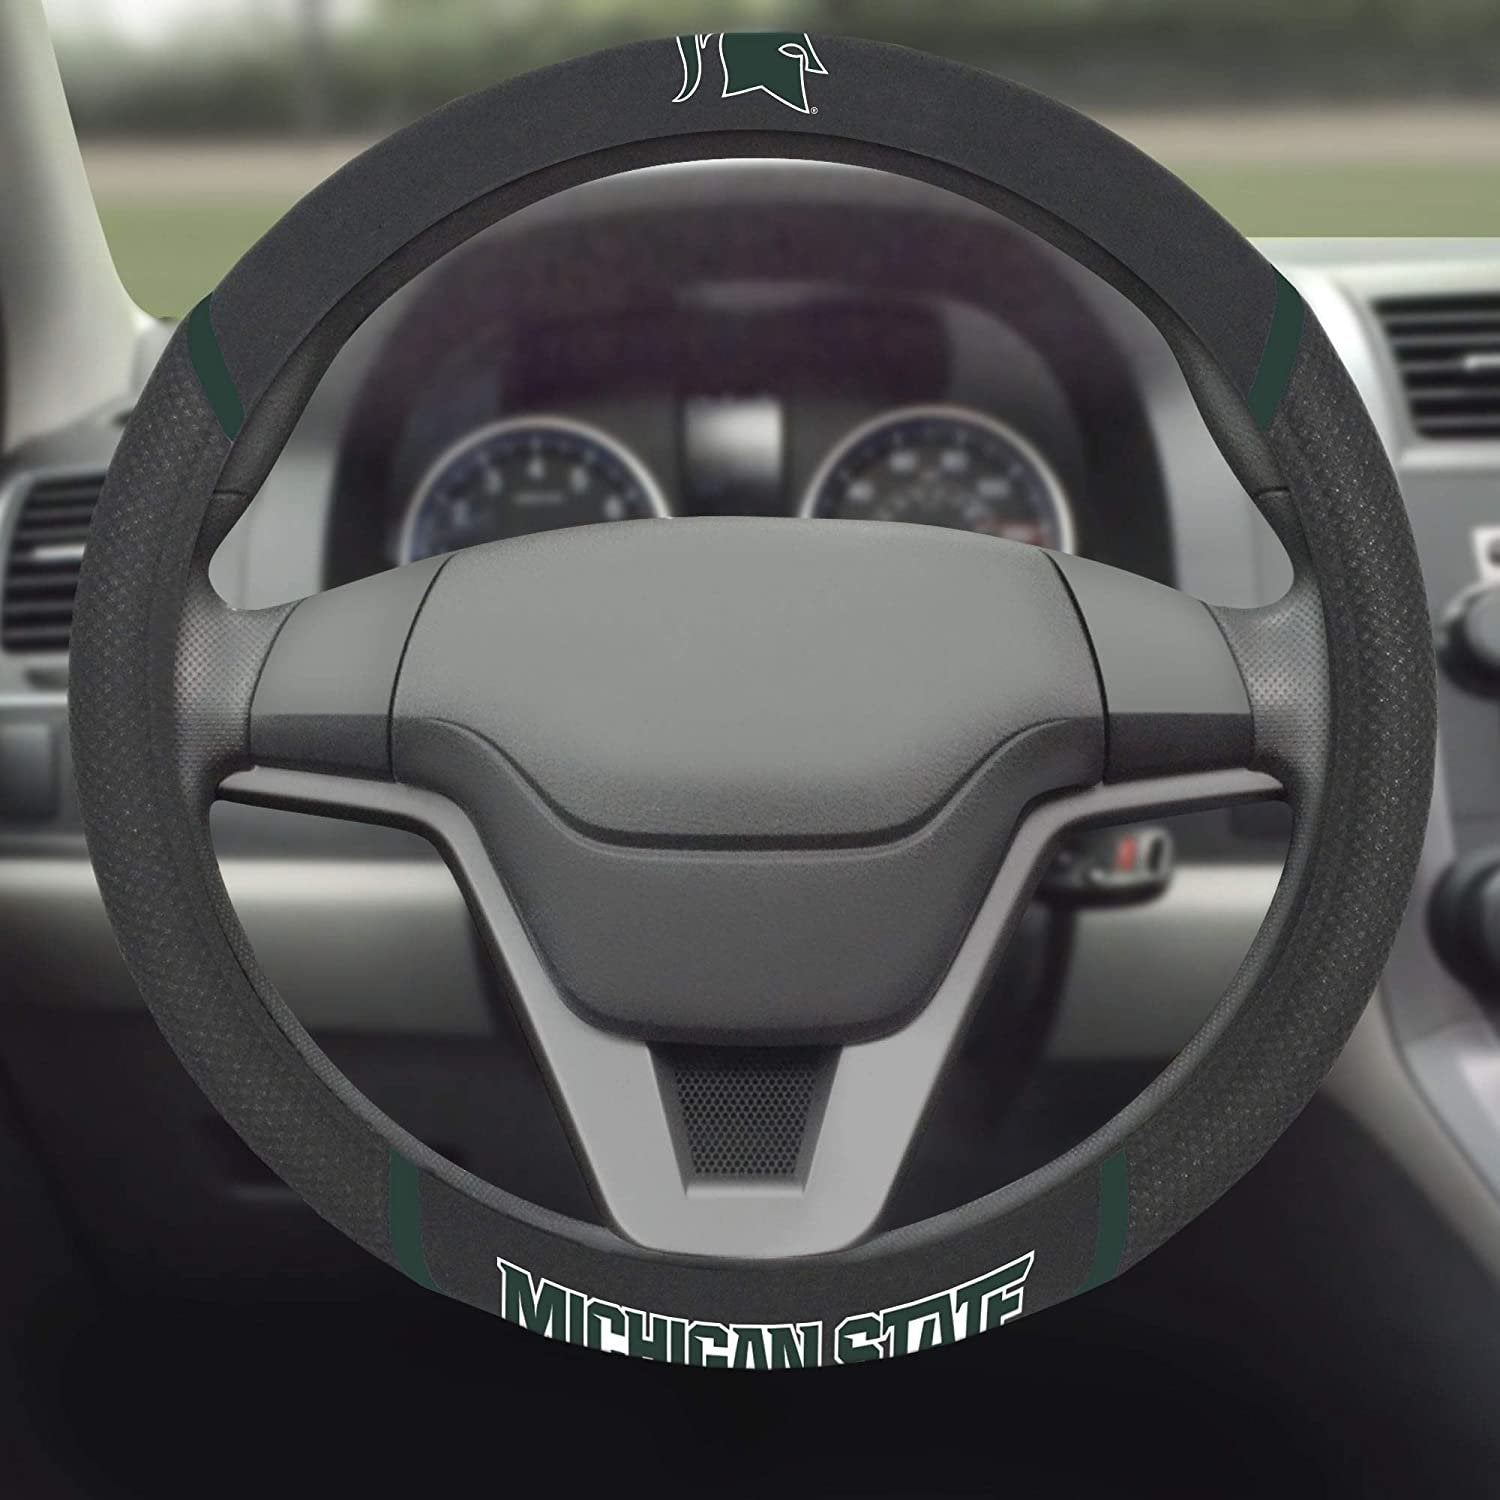 Michigan State Spartans Steering Wheel Cover Premium Embroidered Black 15 Inch University